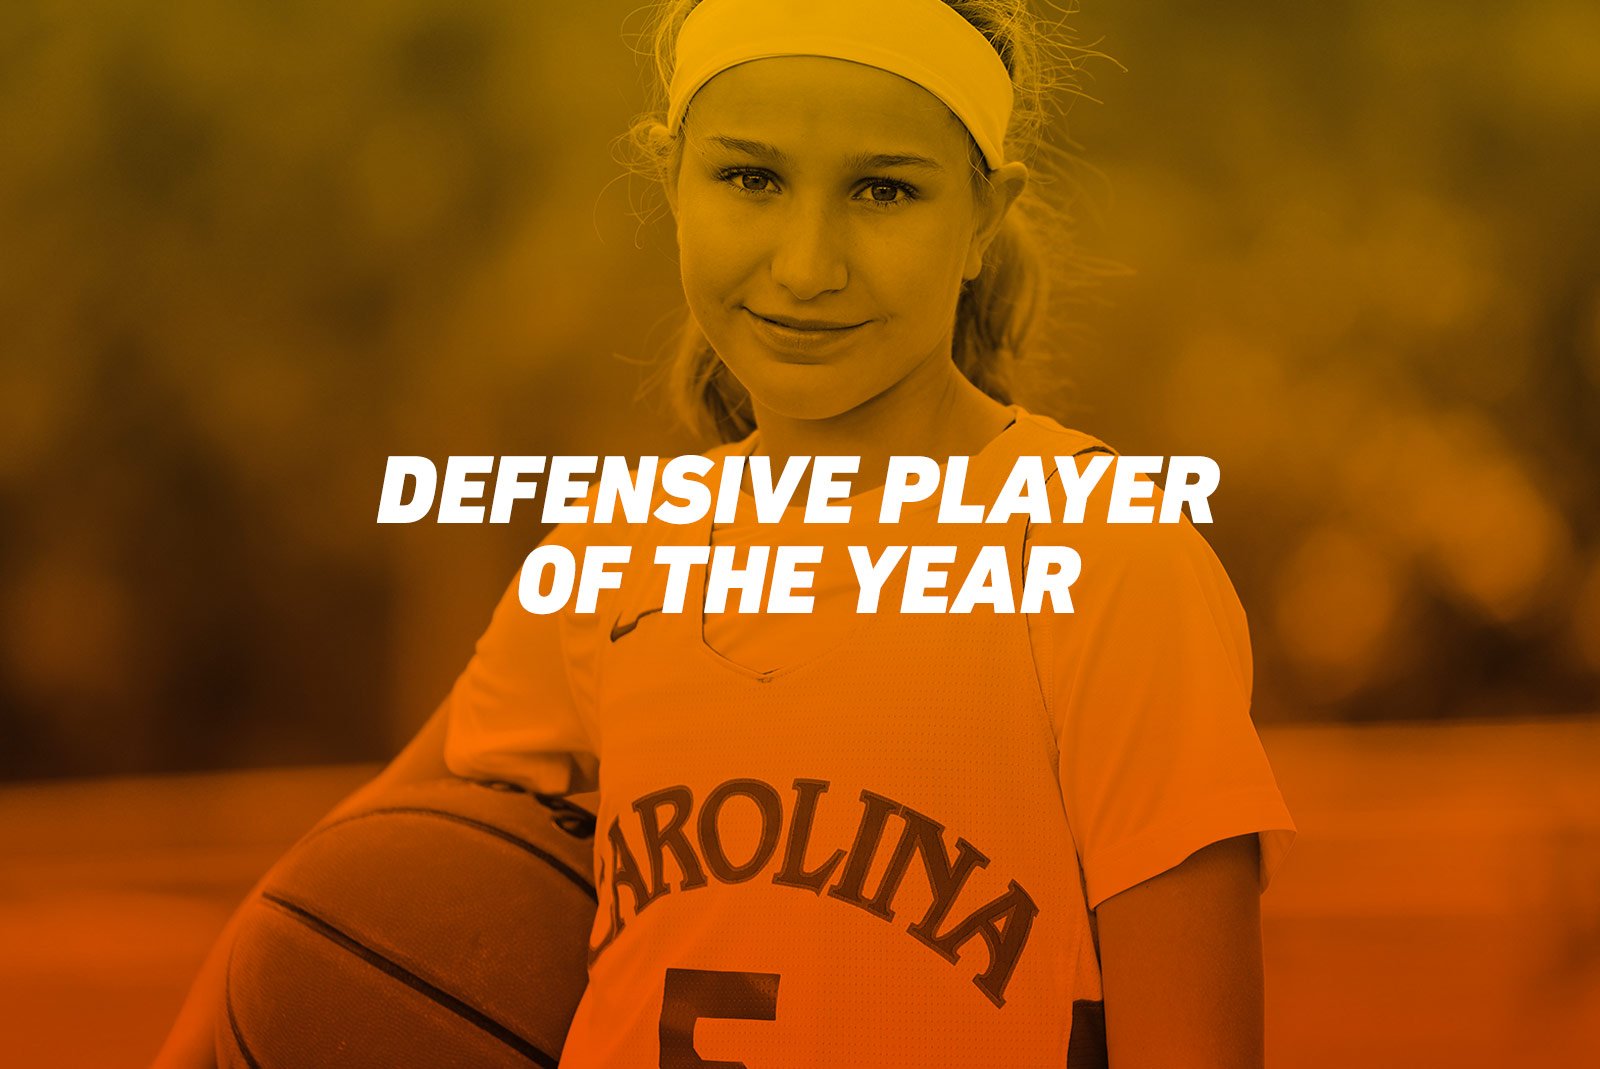 Meghan was named defensive player of the year